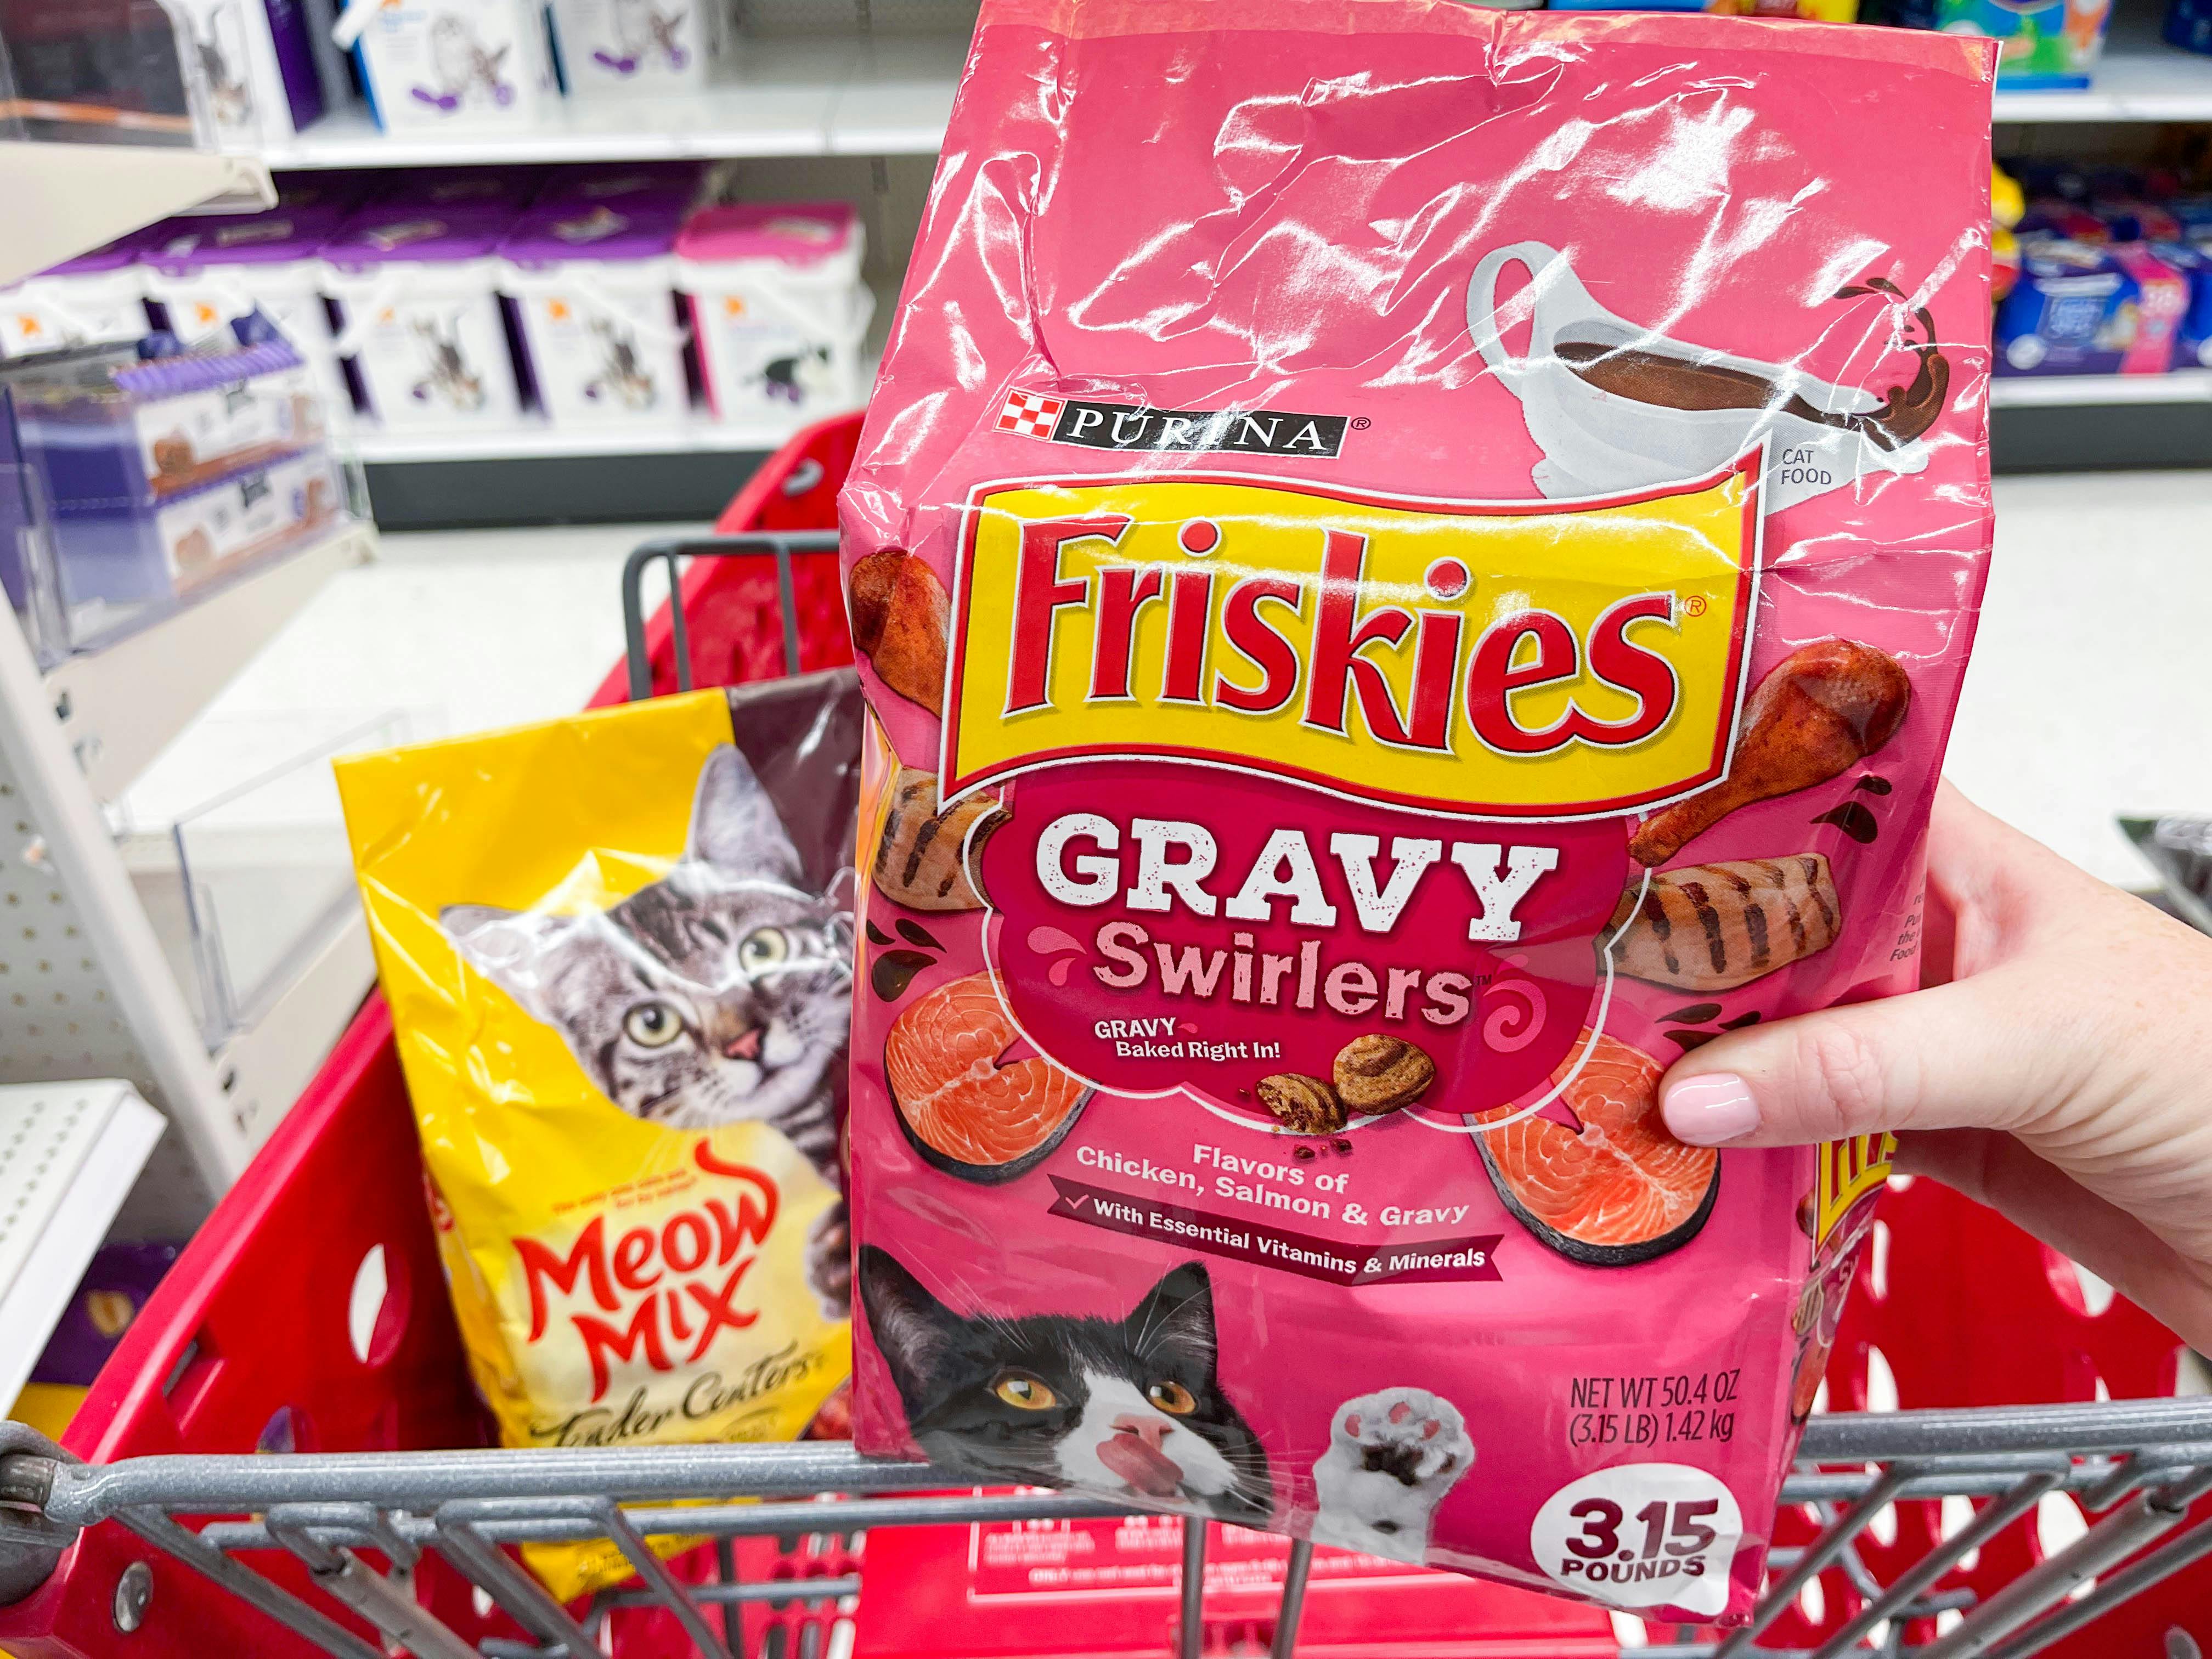 a bag of meow mix in cart in the background with a bag of friskies cat food being held on handle of cart